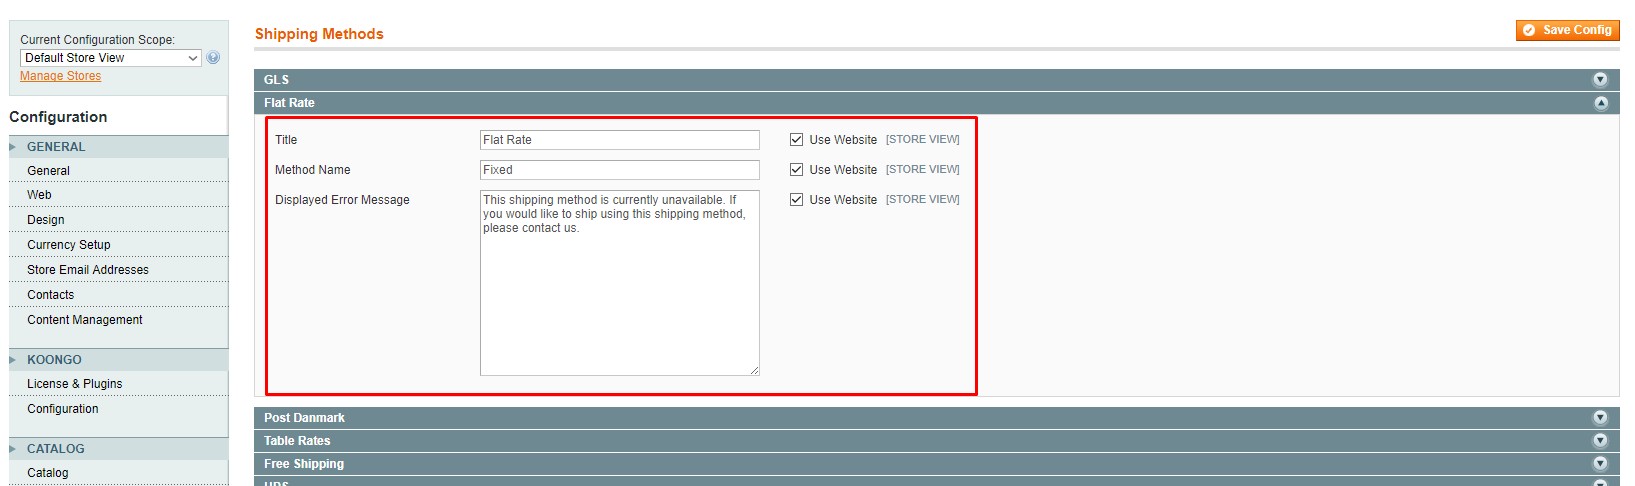 How To Use the Admin Configuration Scopes in Magento 1.9 and 2.2_7